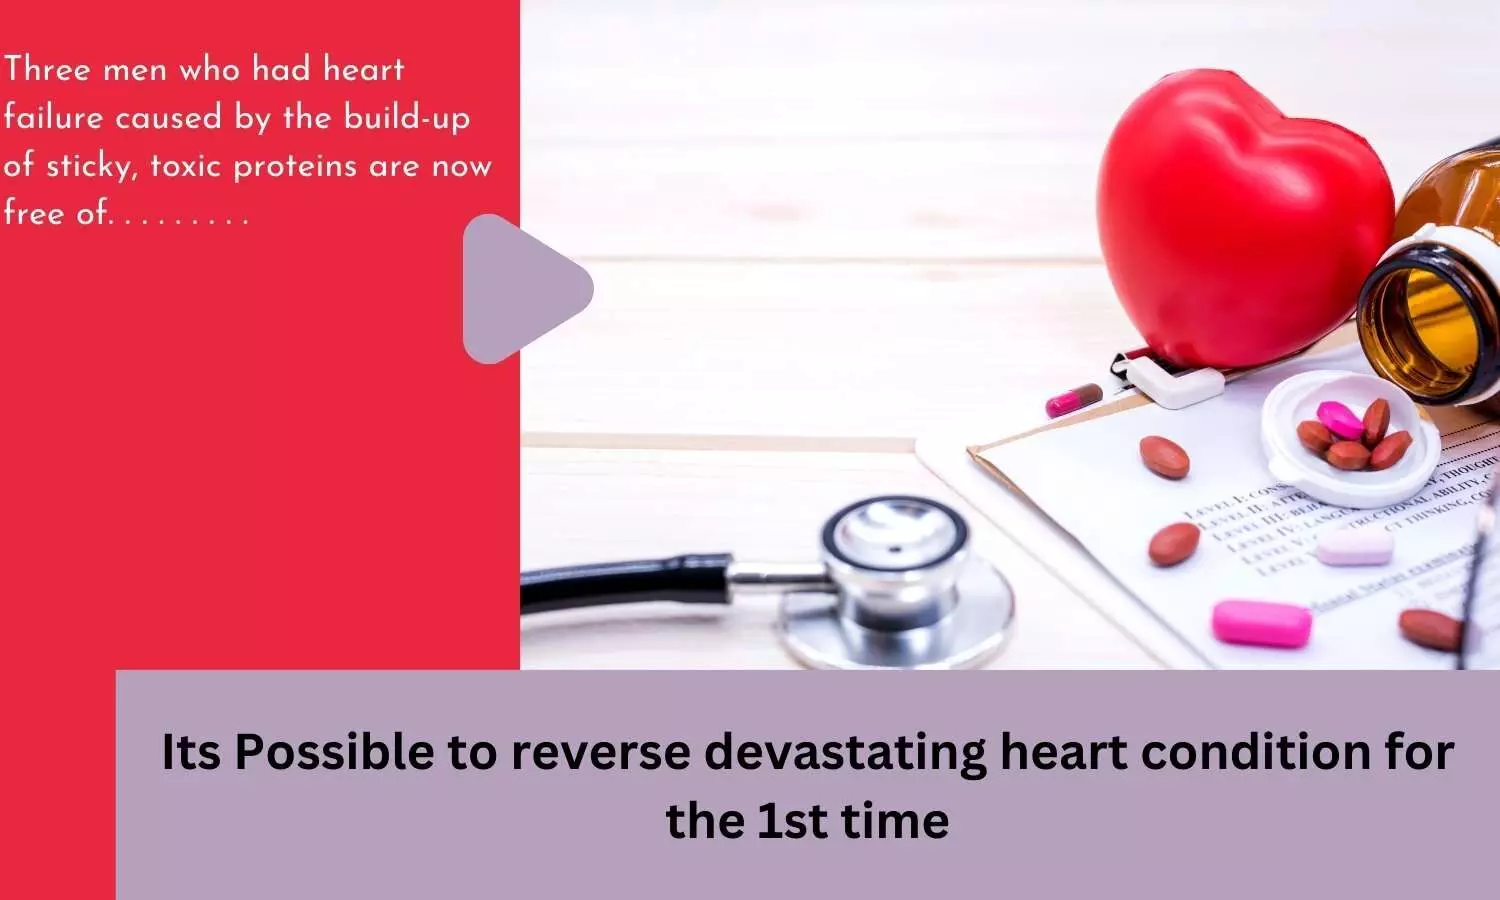 Its Possible to reverse devastating heart condition for the 1st time